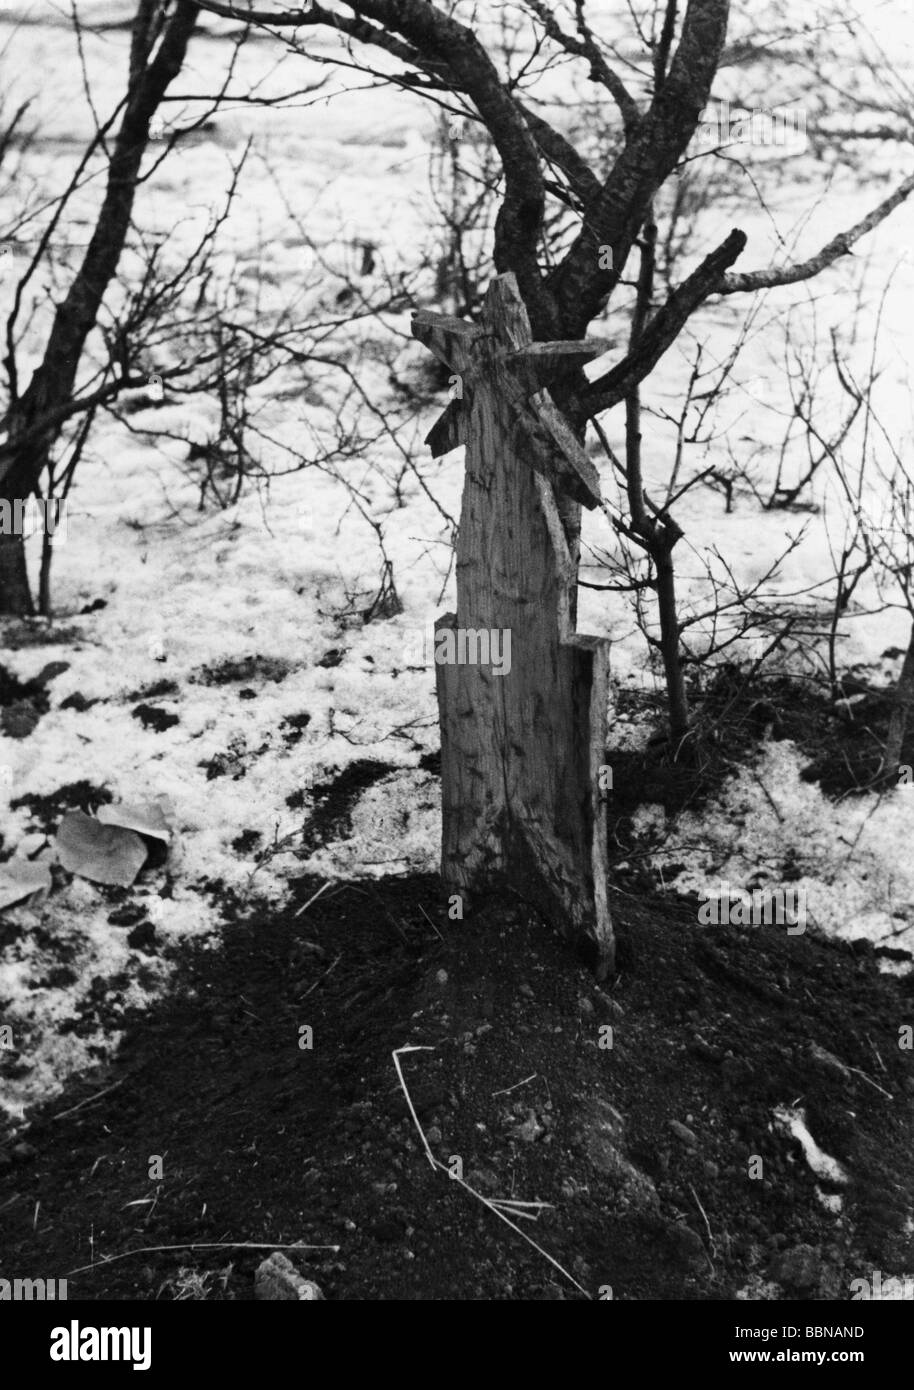 events, Second World War / WWII, Russia 1944 / 1945, Soviet soldier's grave at Britskoye, Ukraine, early 1944, Red Army, losses, death, graves, star, 20th century, historic, historical, USSR, Soviet Union, Eastern Front, snow, fallen, 1940s, Stock Photo